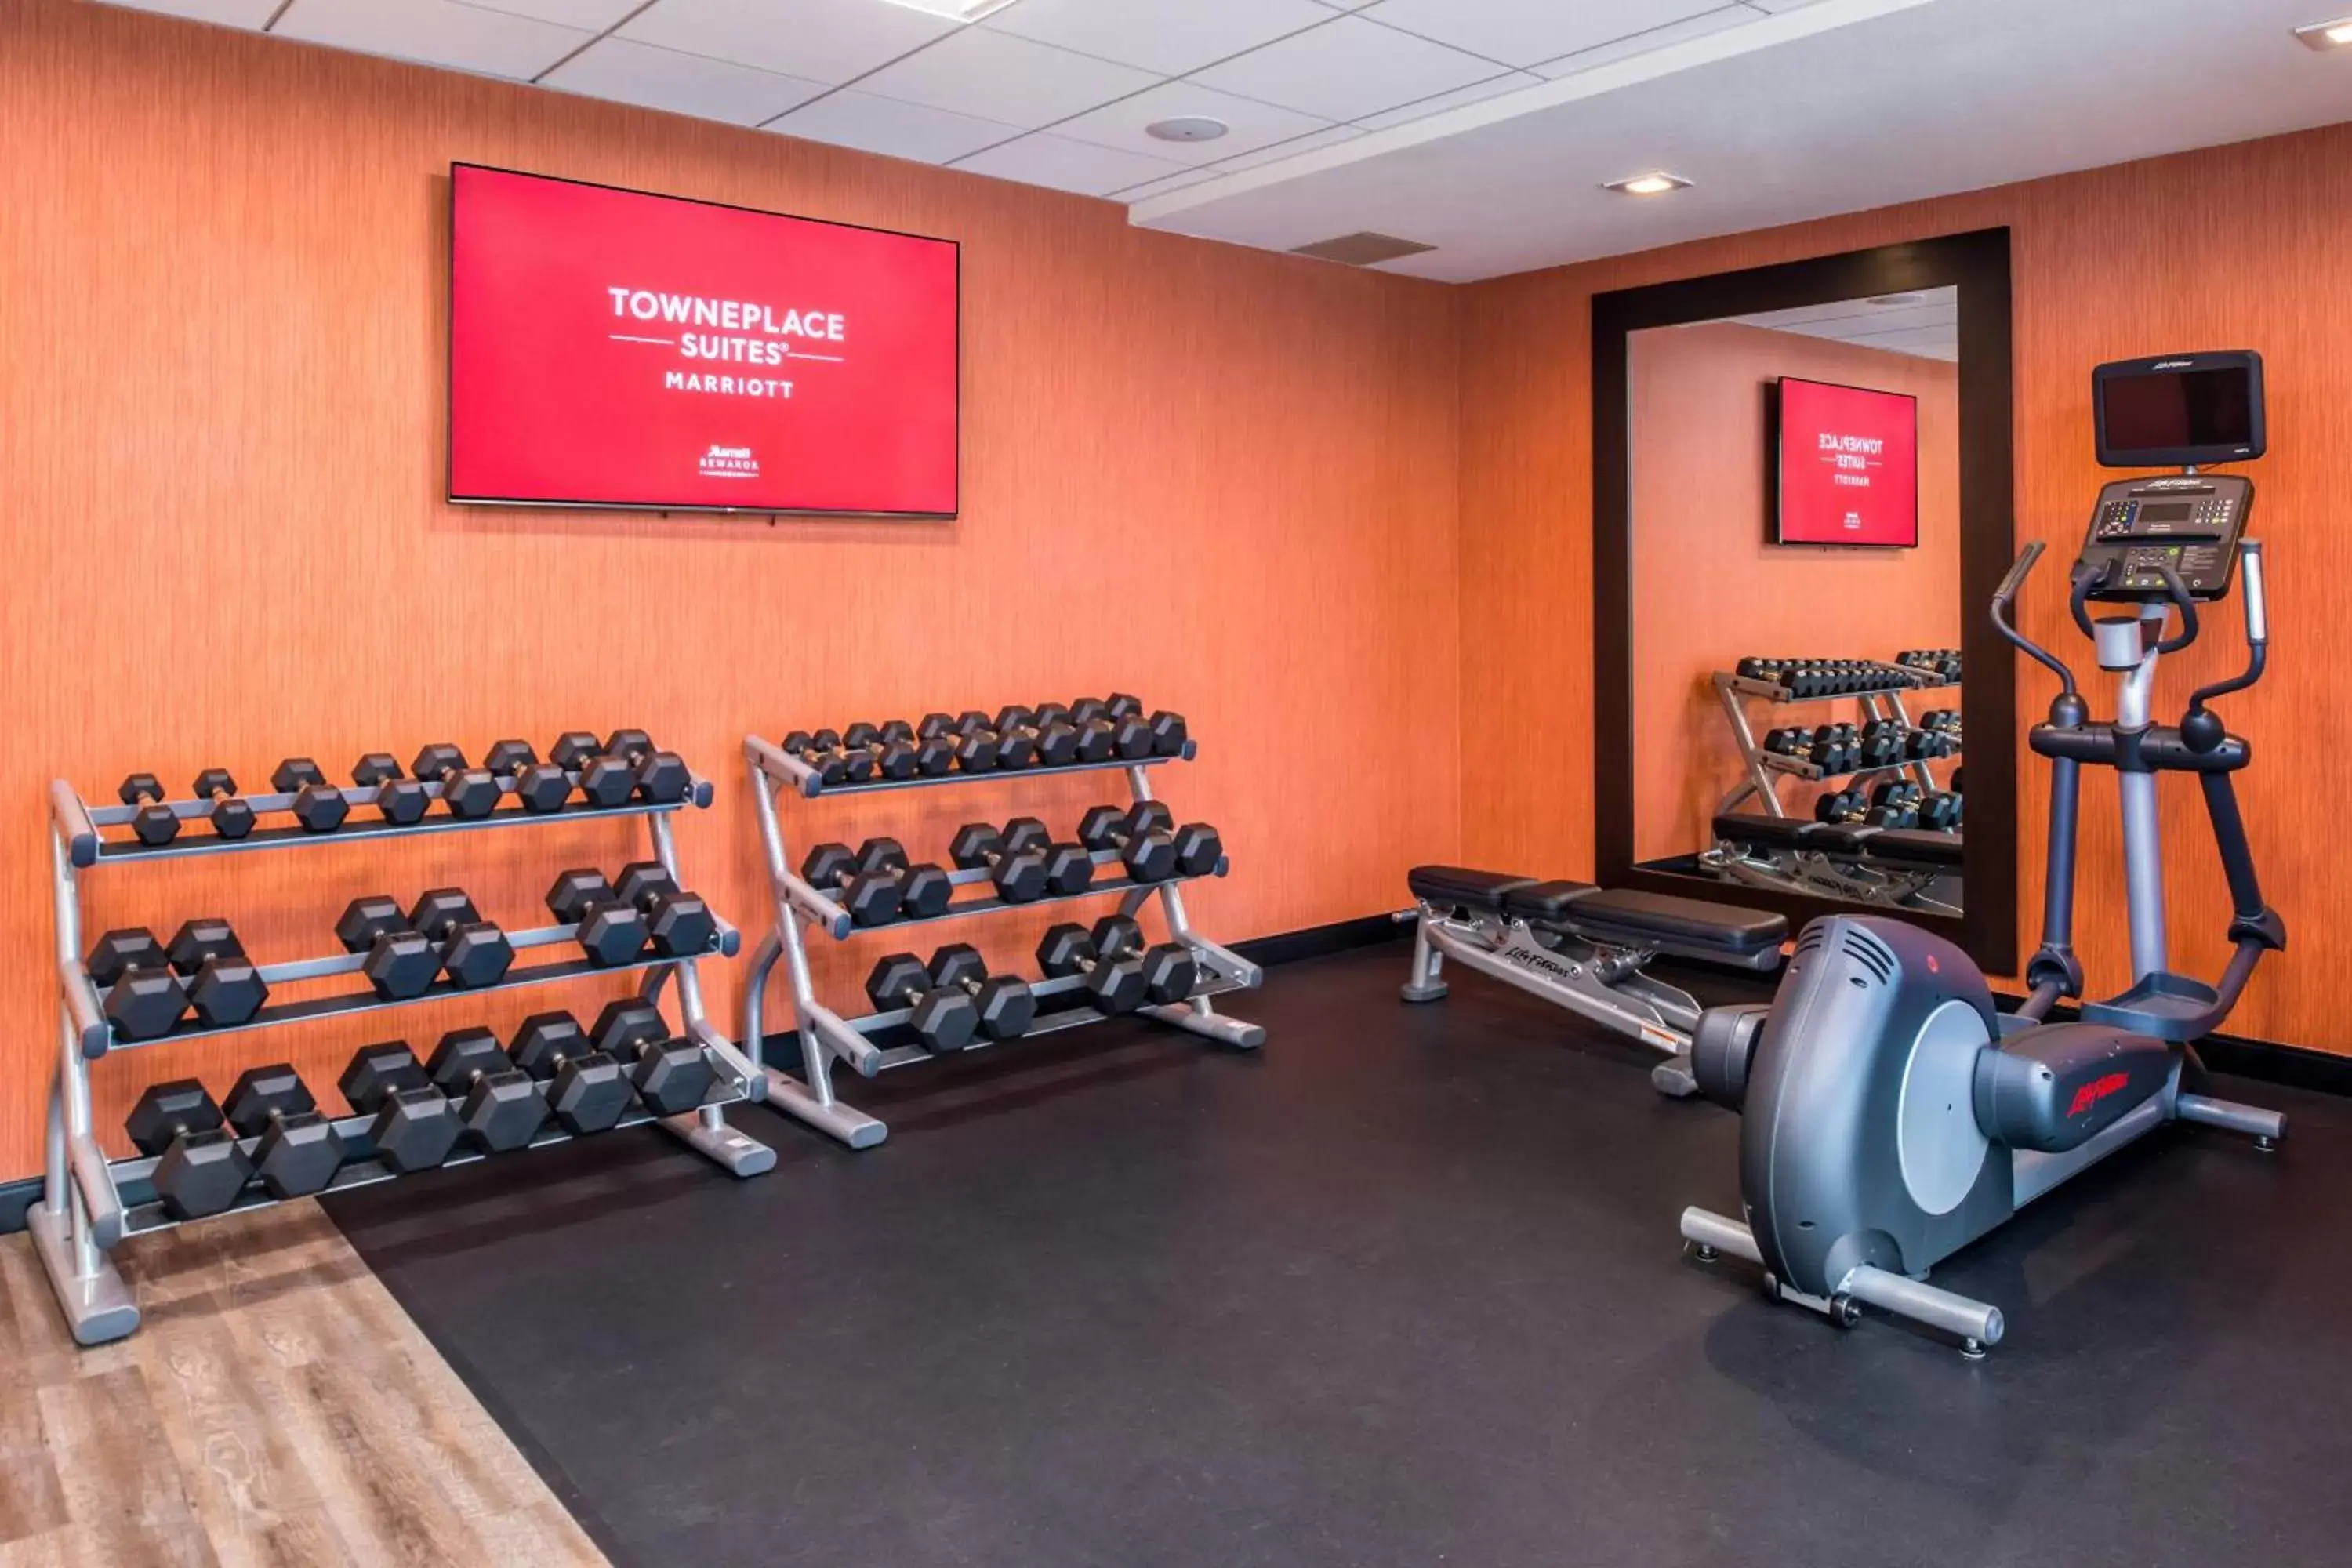 Fitness centre/facilities, Fitness Center/Facilities in TownePlace Suites by Marriott San Bernardino Loma Linda